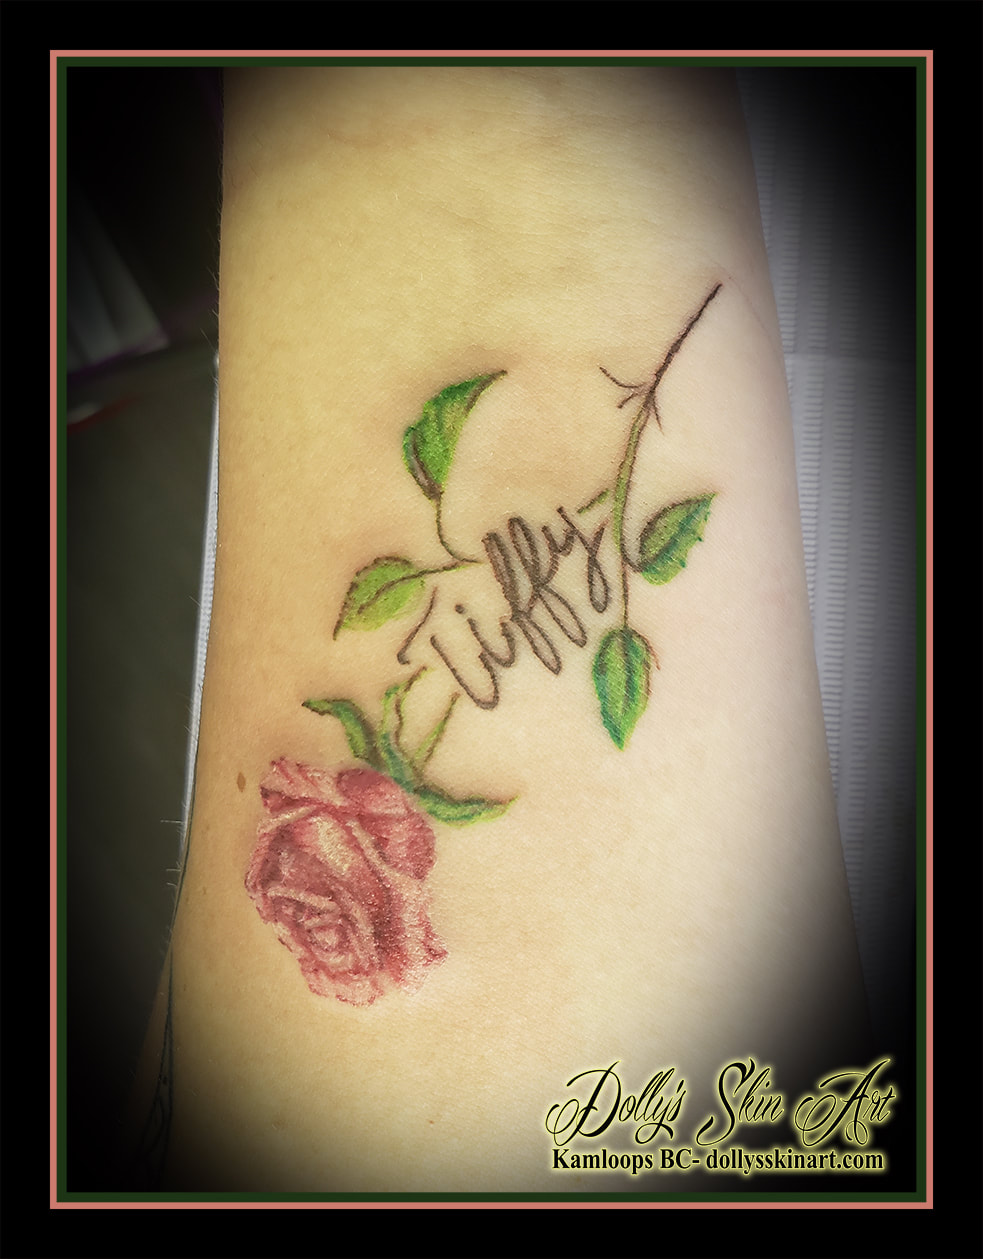 rose tattoo realistic memorial tribute flower colour pink white green brown Tiffy tattoo kamloops dolly's skin art